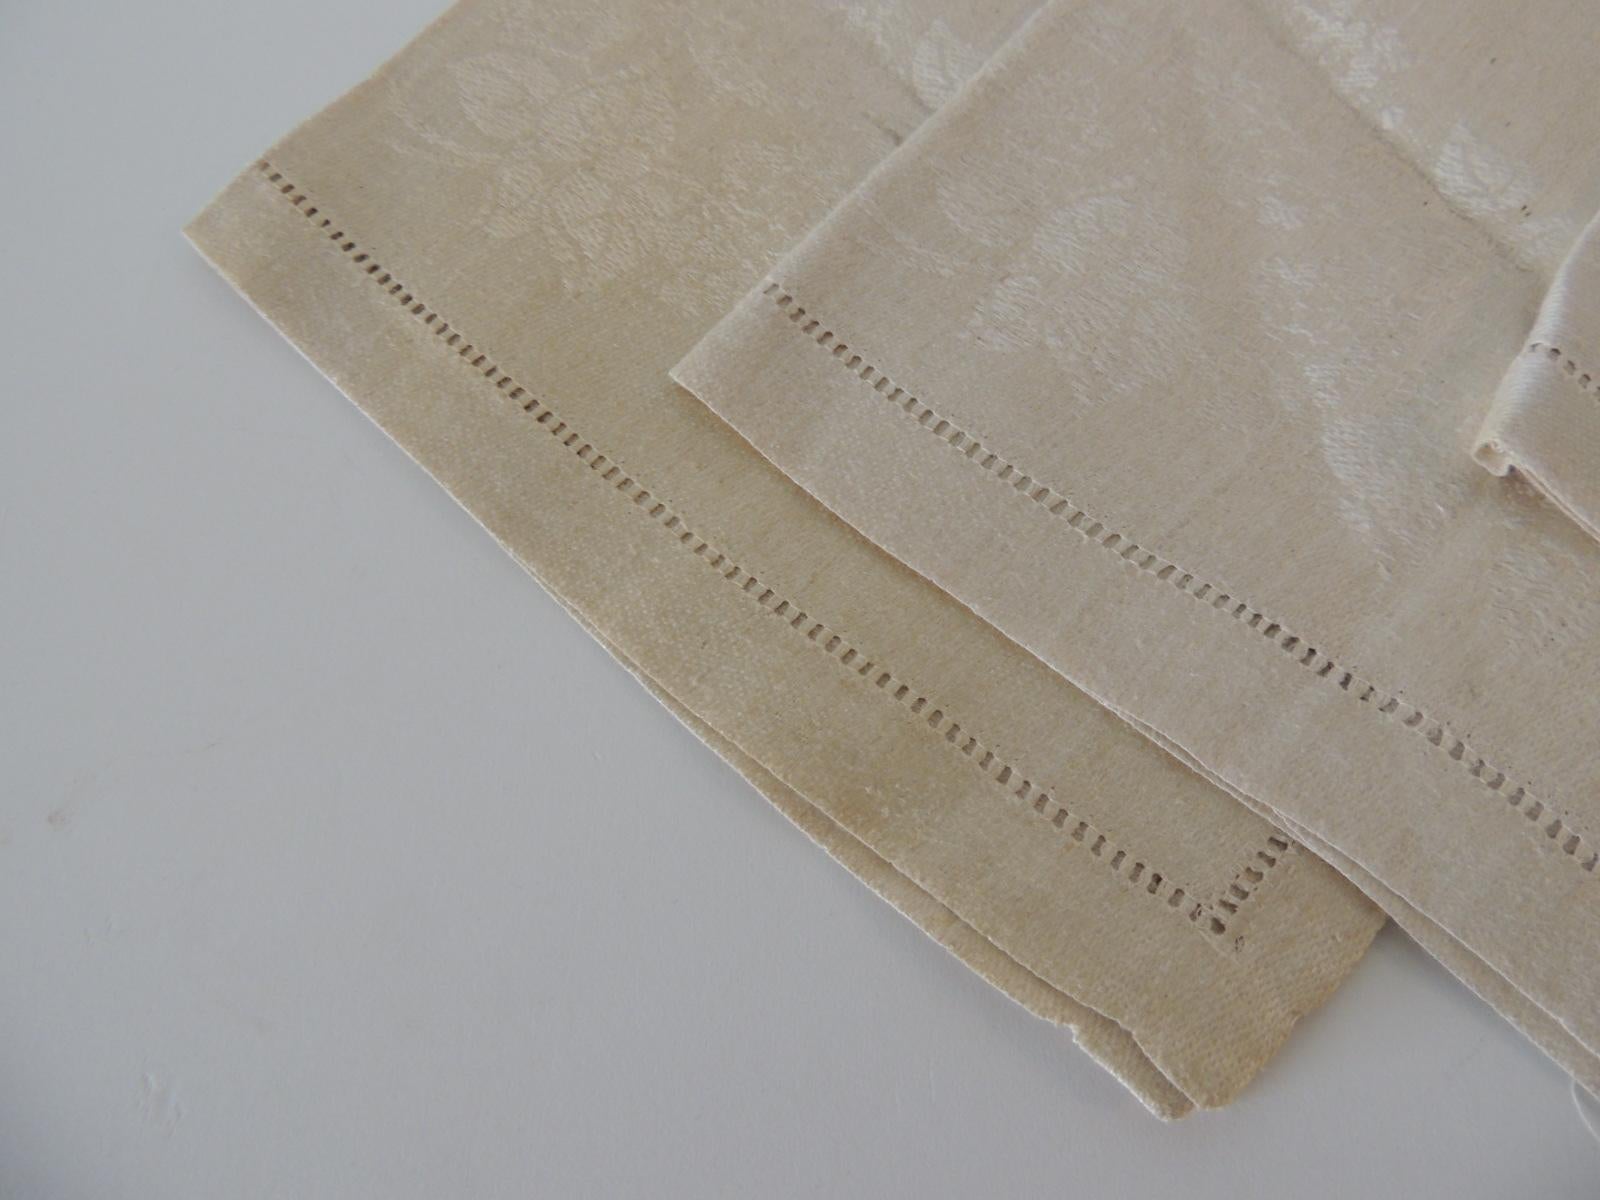 Set of (6) tone-on-tone beige floral damask napkins
Never been used.
Label: Made in Czechoslovakia
Size: 14